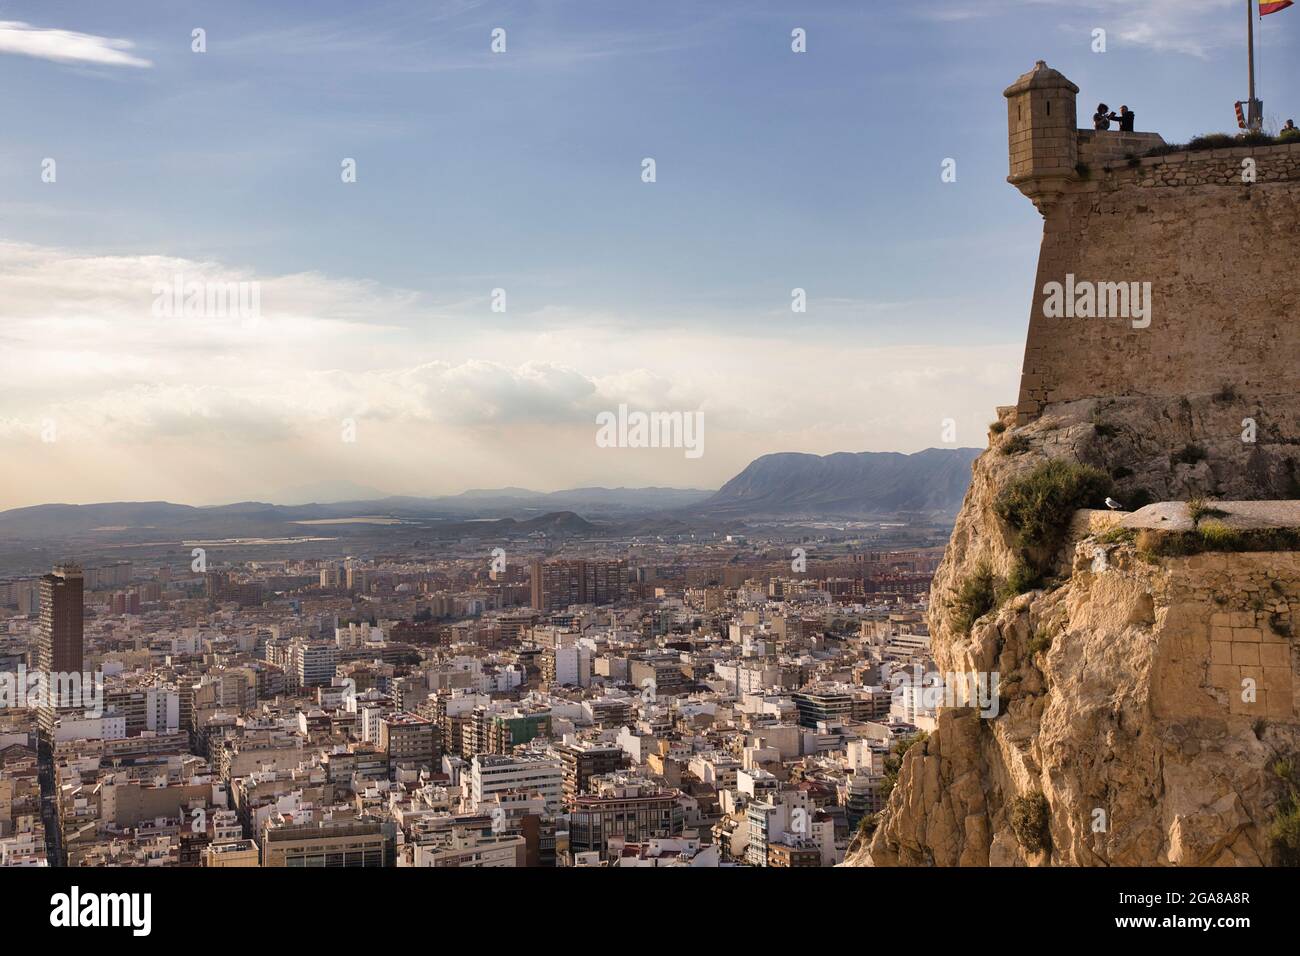 A section of the high castle wall of Santa Barbara castle at Alicante, Spain with a corner turret, overlooking the city below Stock Photo